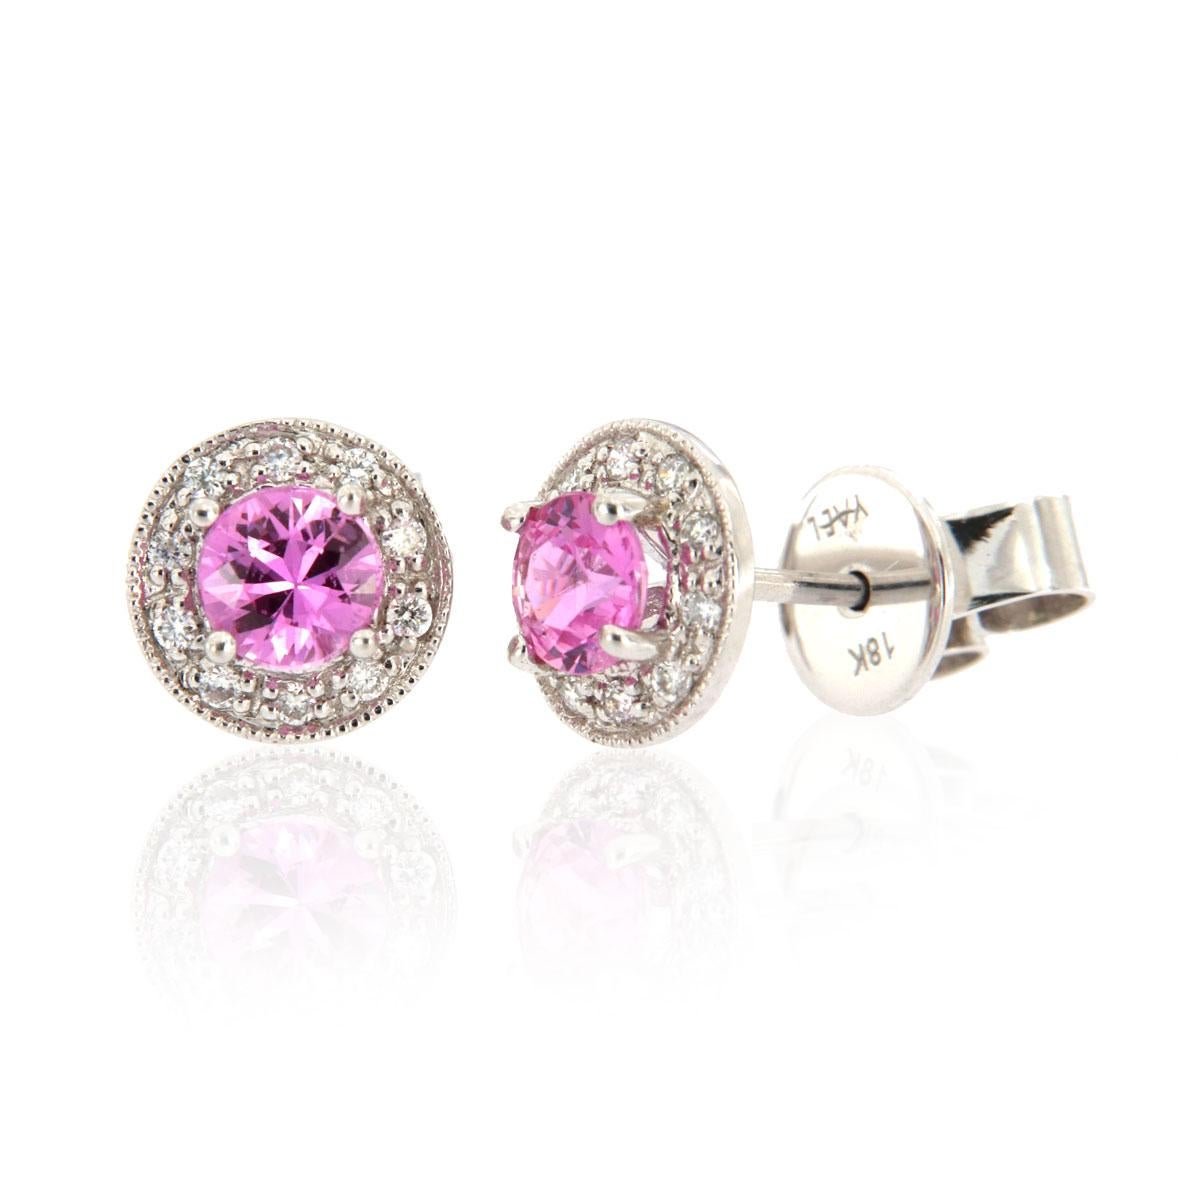 These classic stud earrings feature a 0.75-carat total weight of round pink sapphires surrounded by a halo of full-cut diamonds

Product details: 

Center Gemstone Type: Pink Sapphire
Center Gemstone Carat Weight: 0.75
Center Gemstone Diameter: 4.3